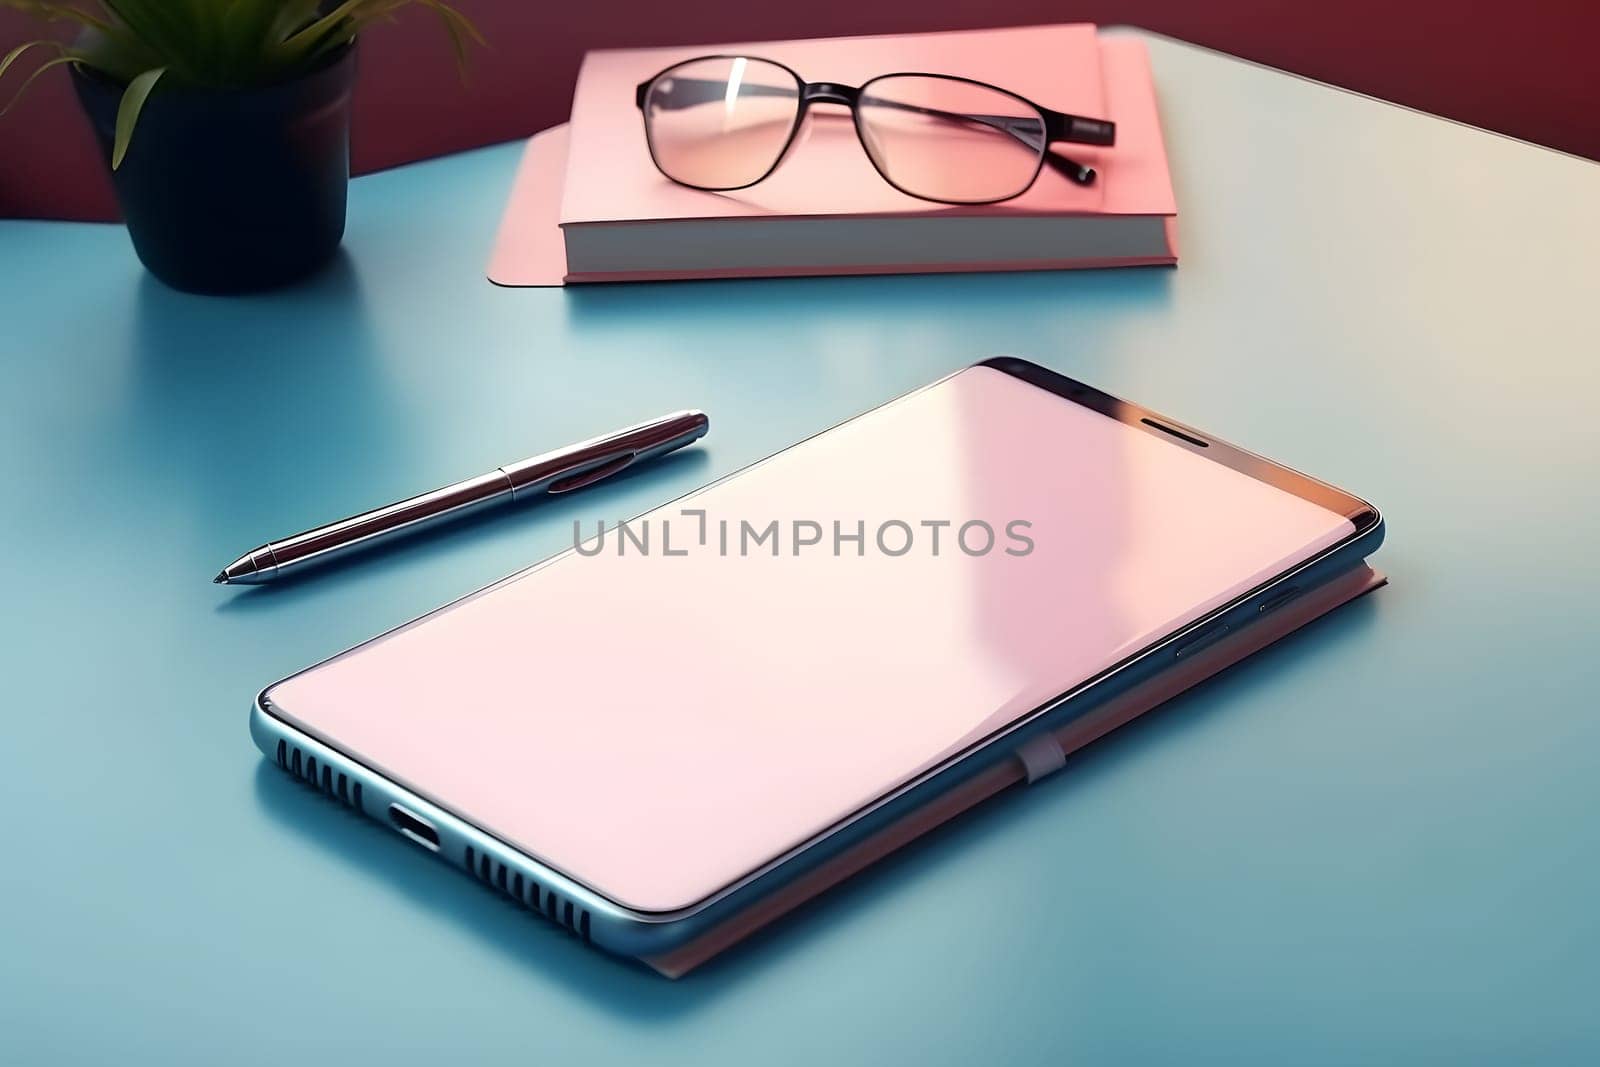 Smartphone, glasses, pen and pink notebook on blue table. Mock up, neural network generated image by z1b